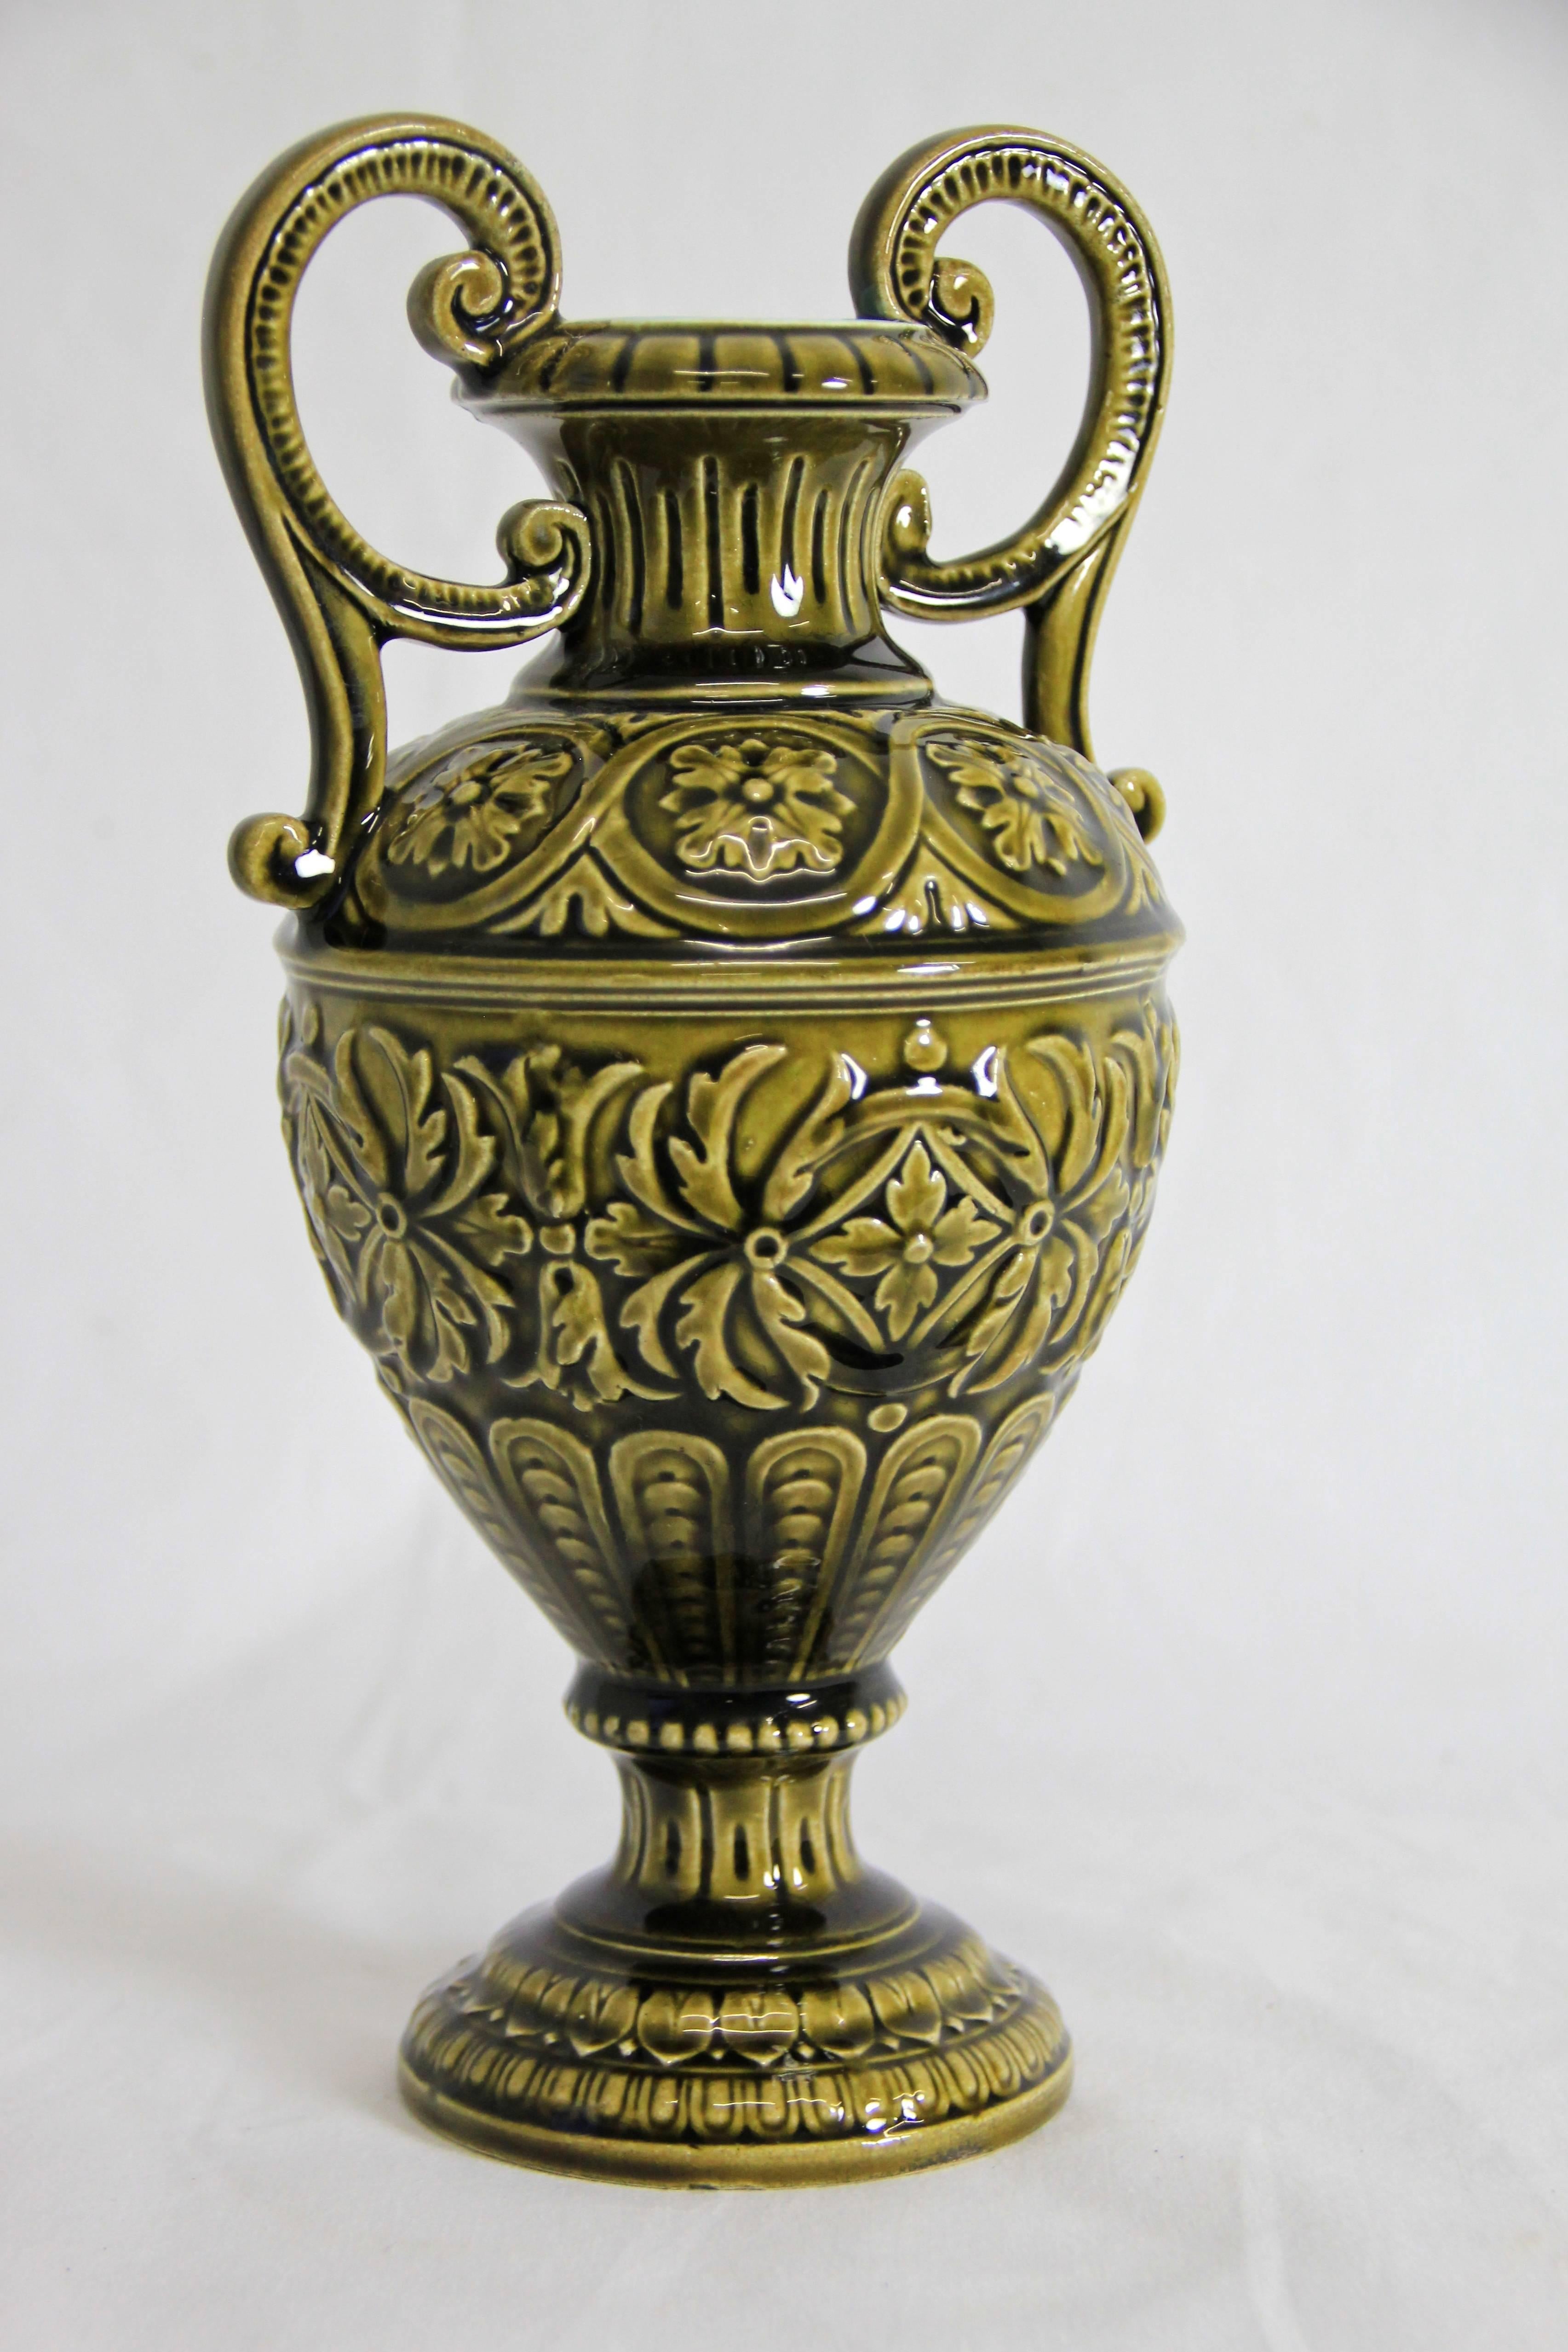 In an absolute perfect condition comes this beautiful Amphora vase from the famous manufacture of the brothers 